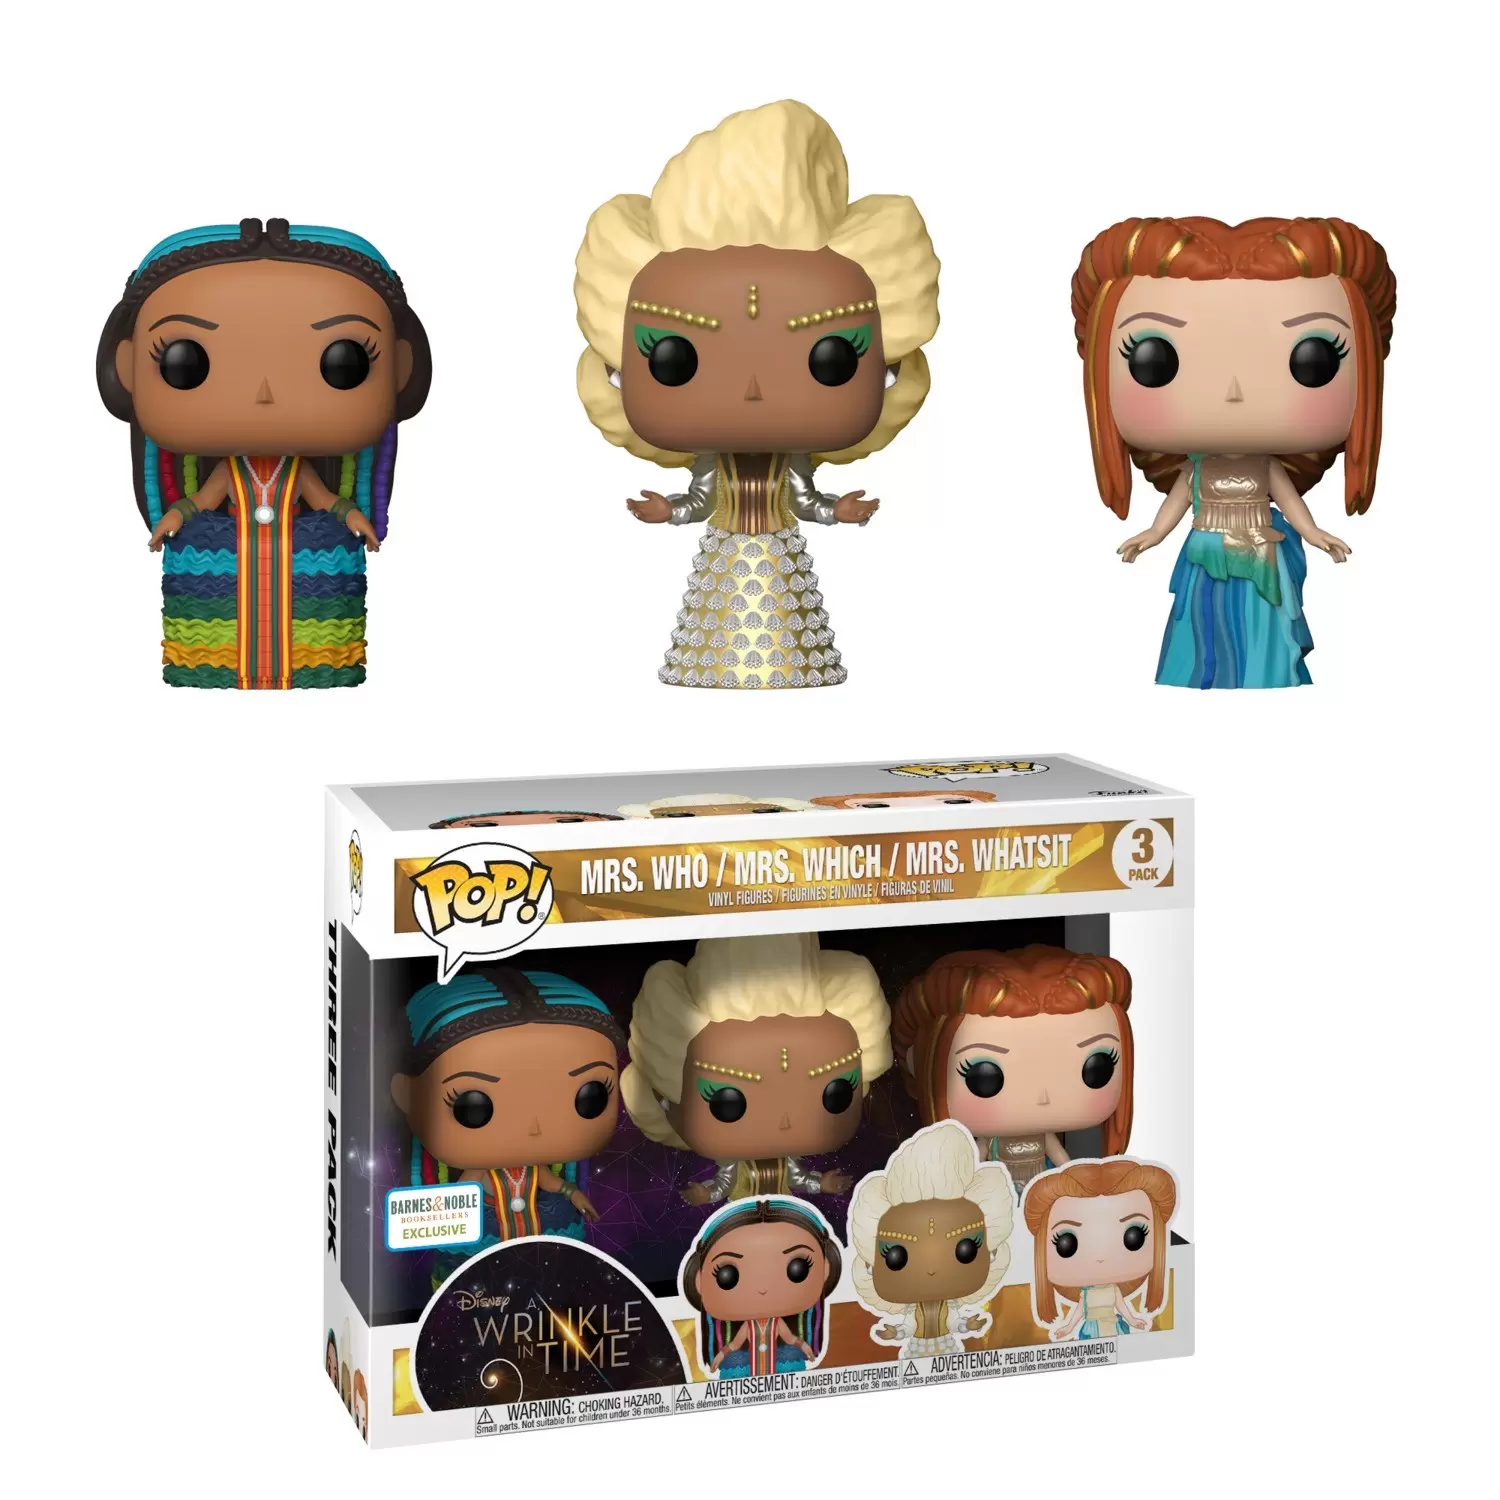 POP! Disney - A wrinkle in Time - Mrs. Who, Mrs. Which and Mrs. Whatsit 3 Pack